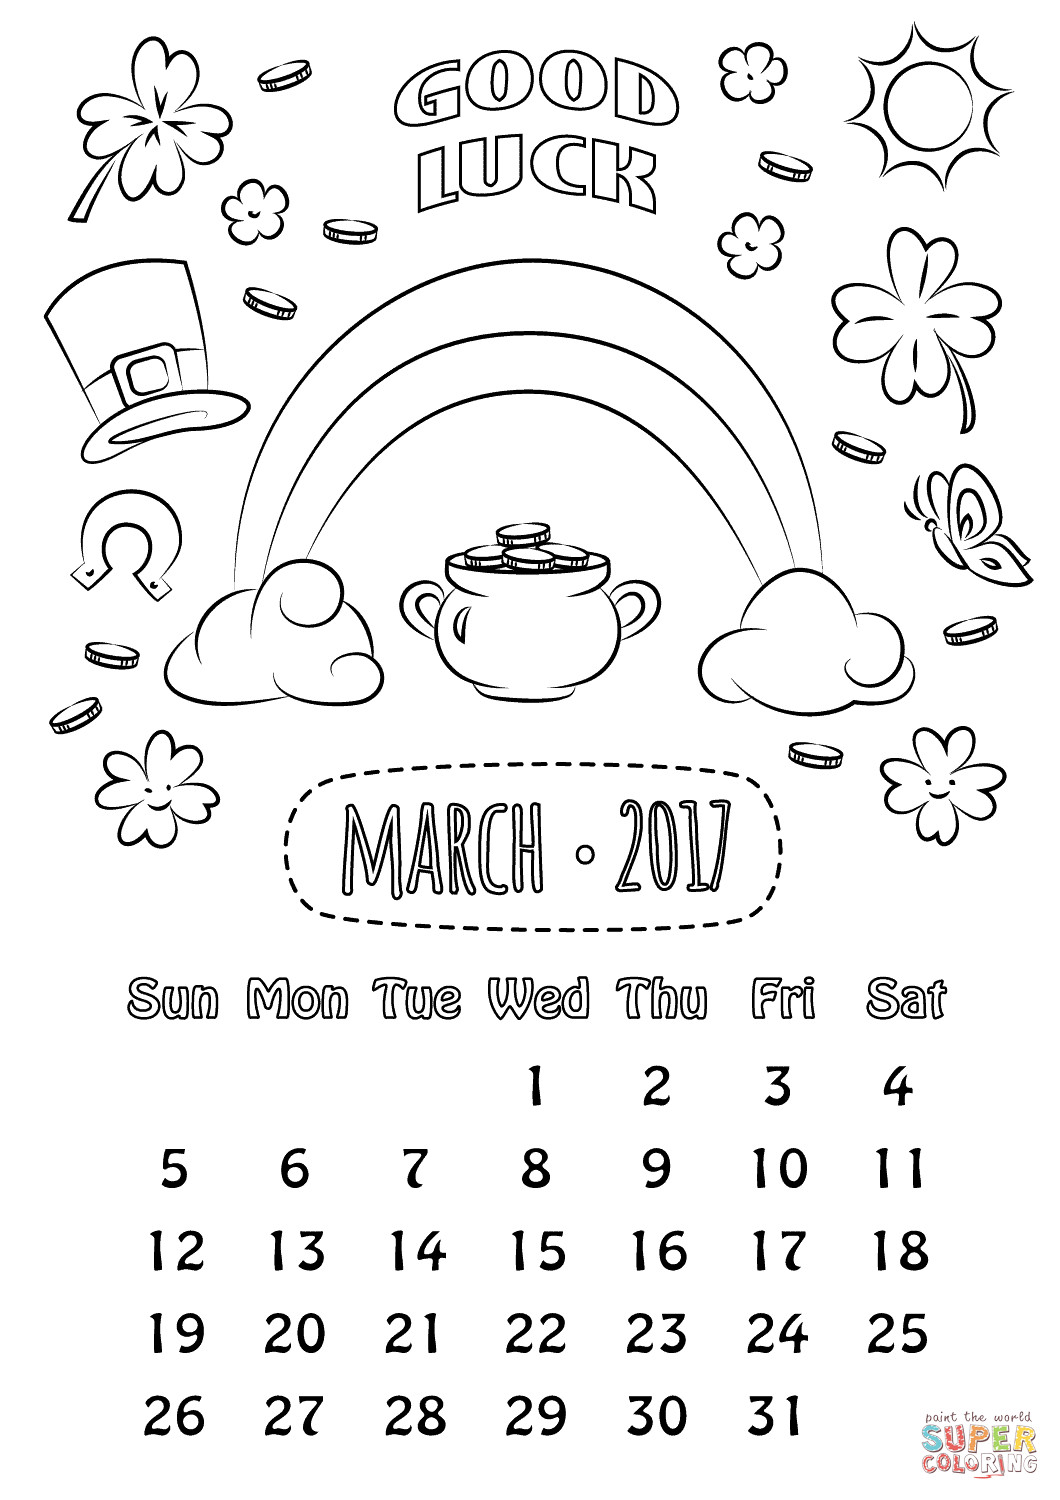 Monthly Calendar Coloring Pages at GetDrawings Free download